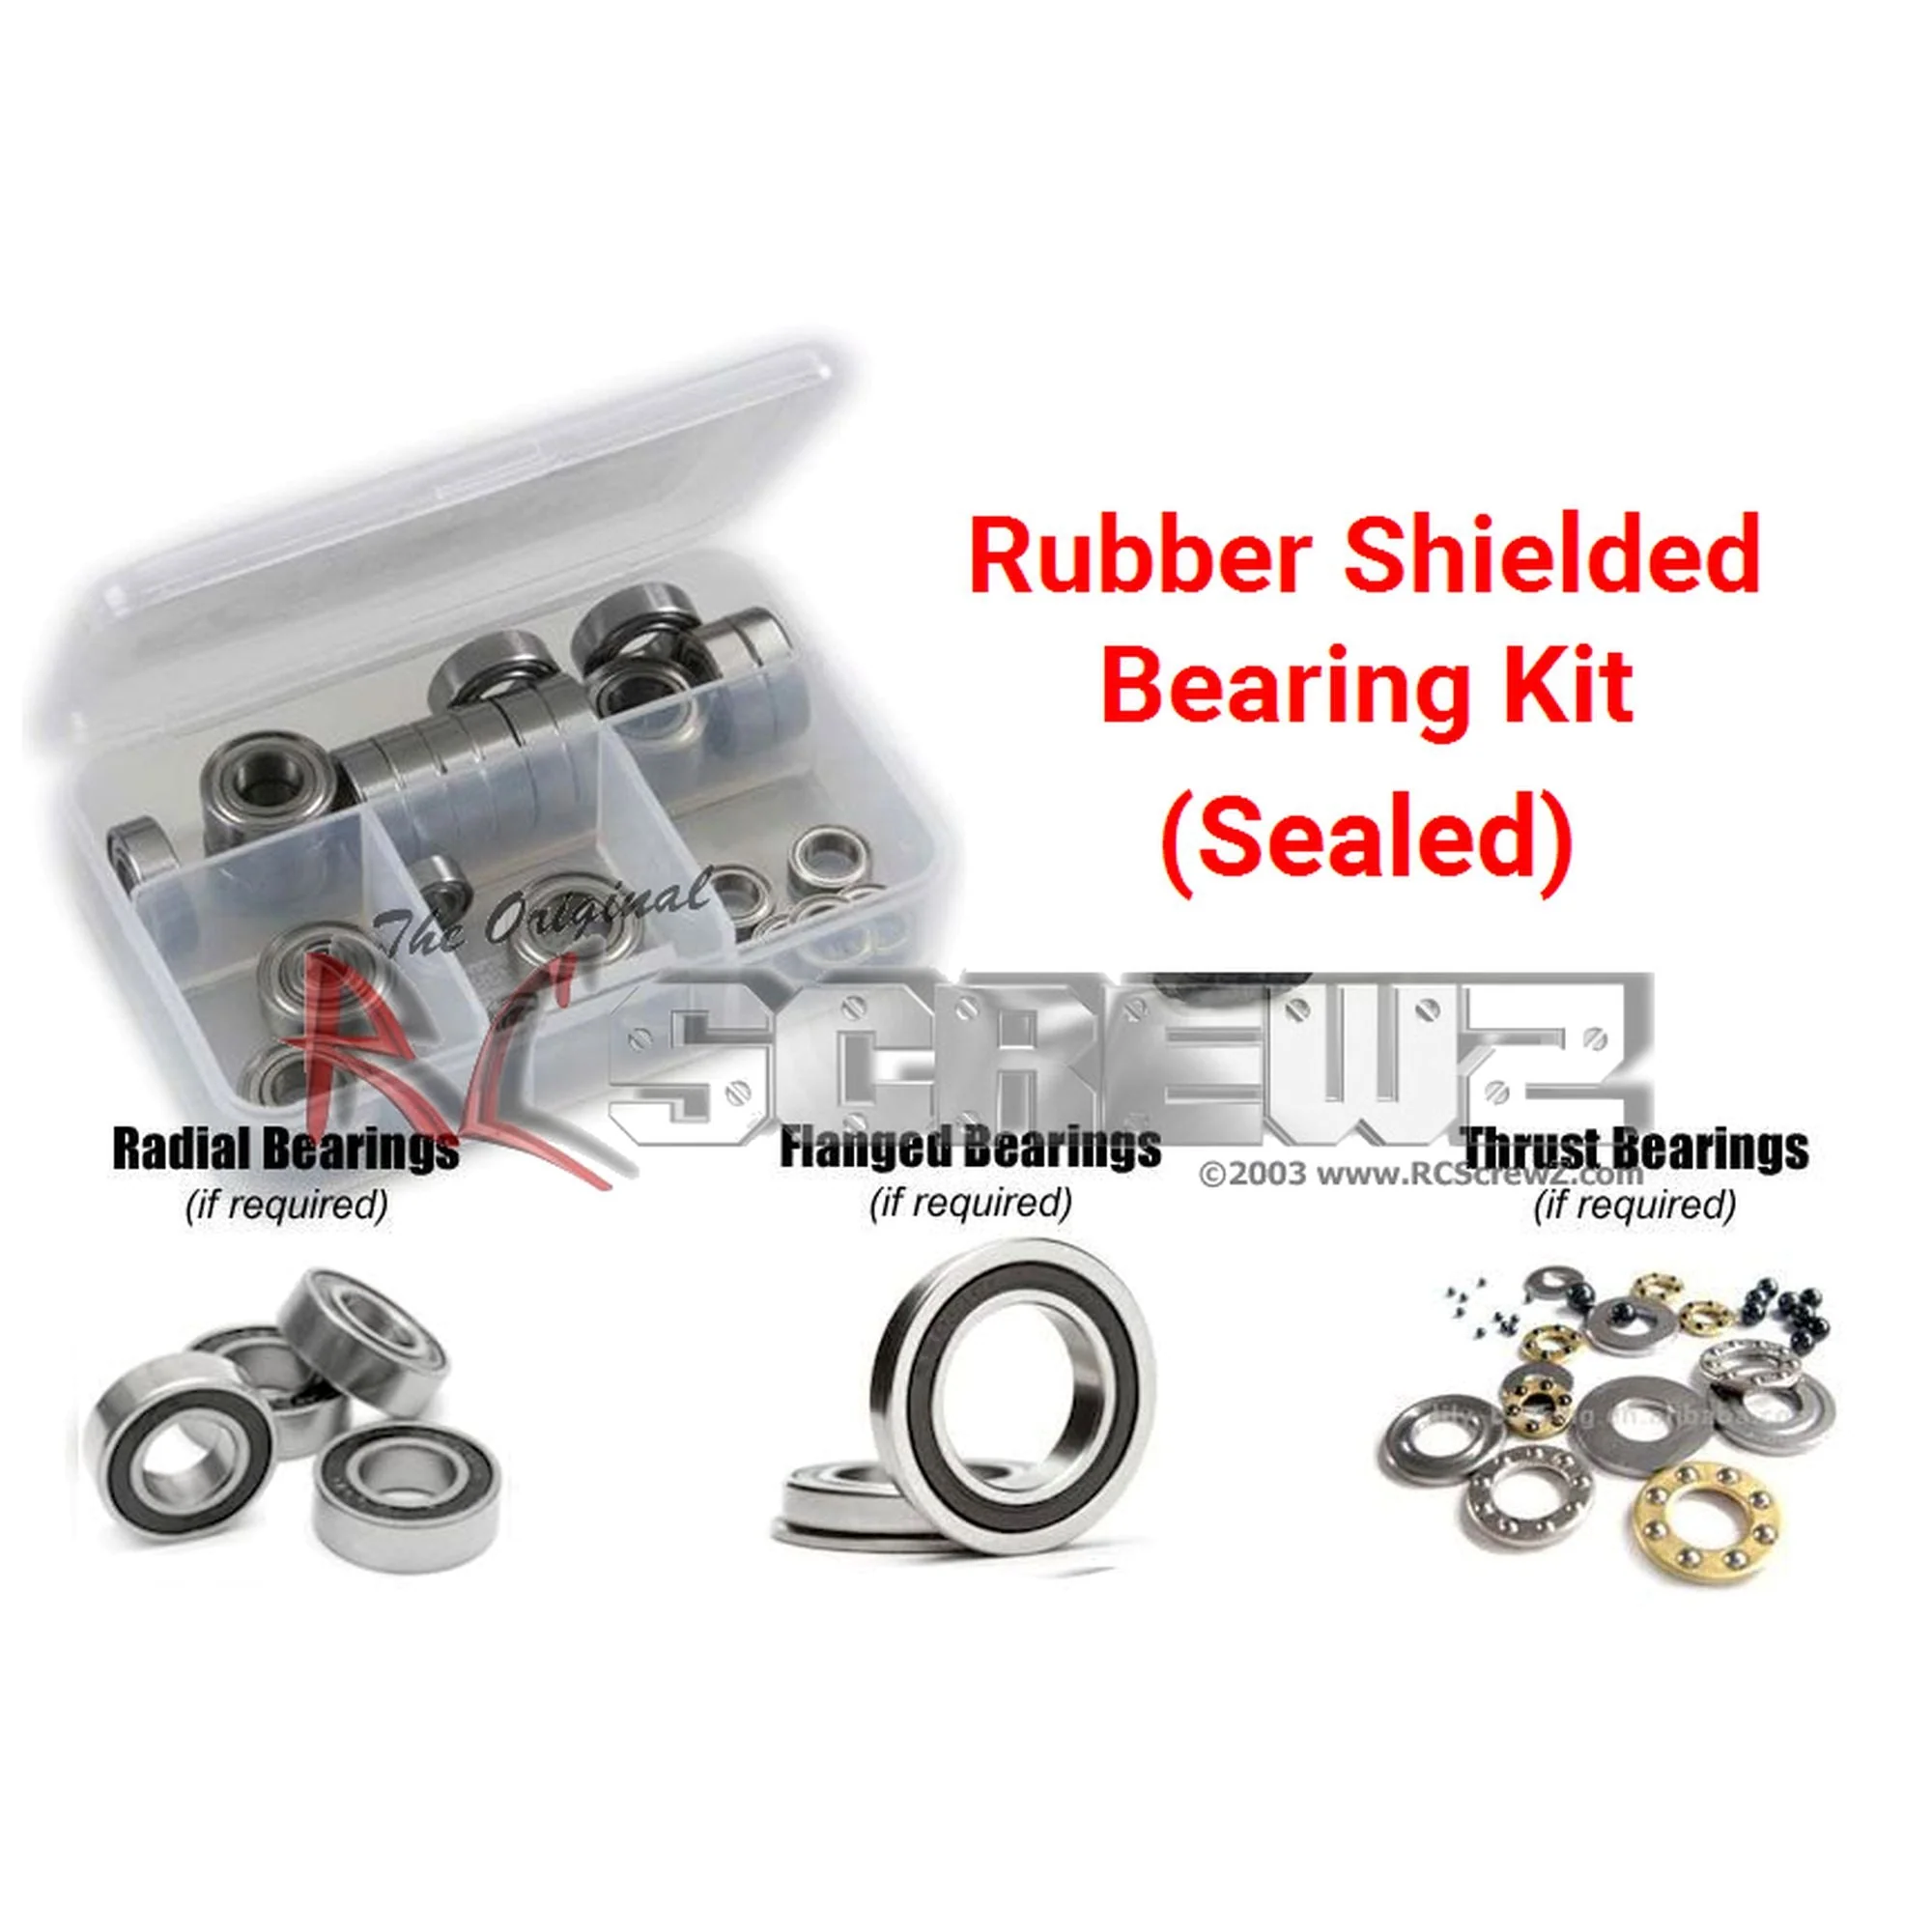 RCScrewZ Rubber Shielded Bearing Kit xra053r for XRAY RX8 2012 #340001 - Picture 1 of 12